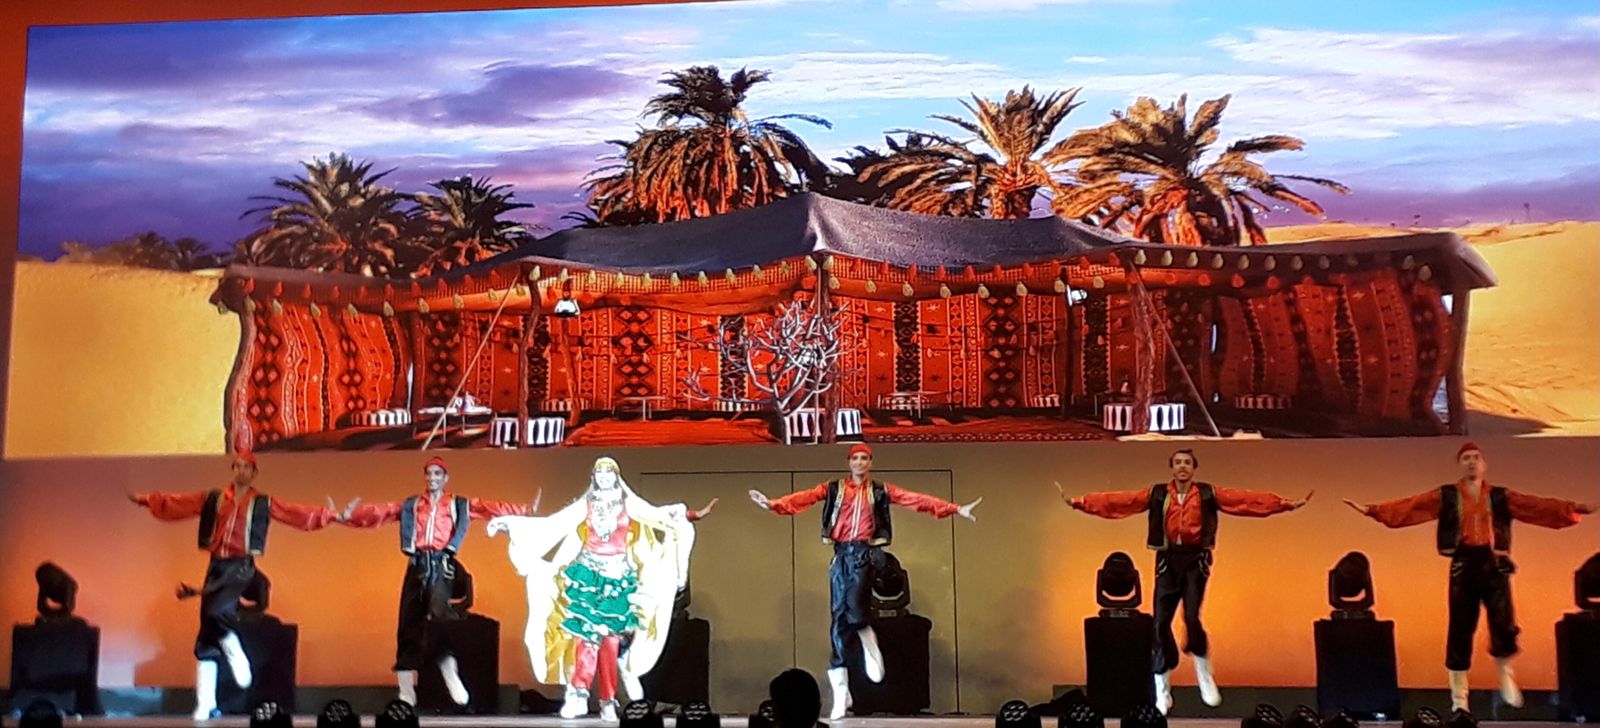 Part of the Egyptian performances in Expo 2020 Dubai - Min. of Culture